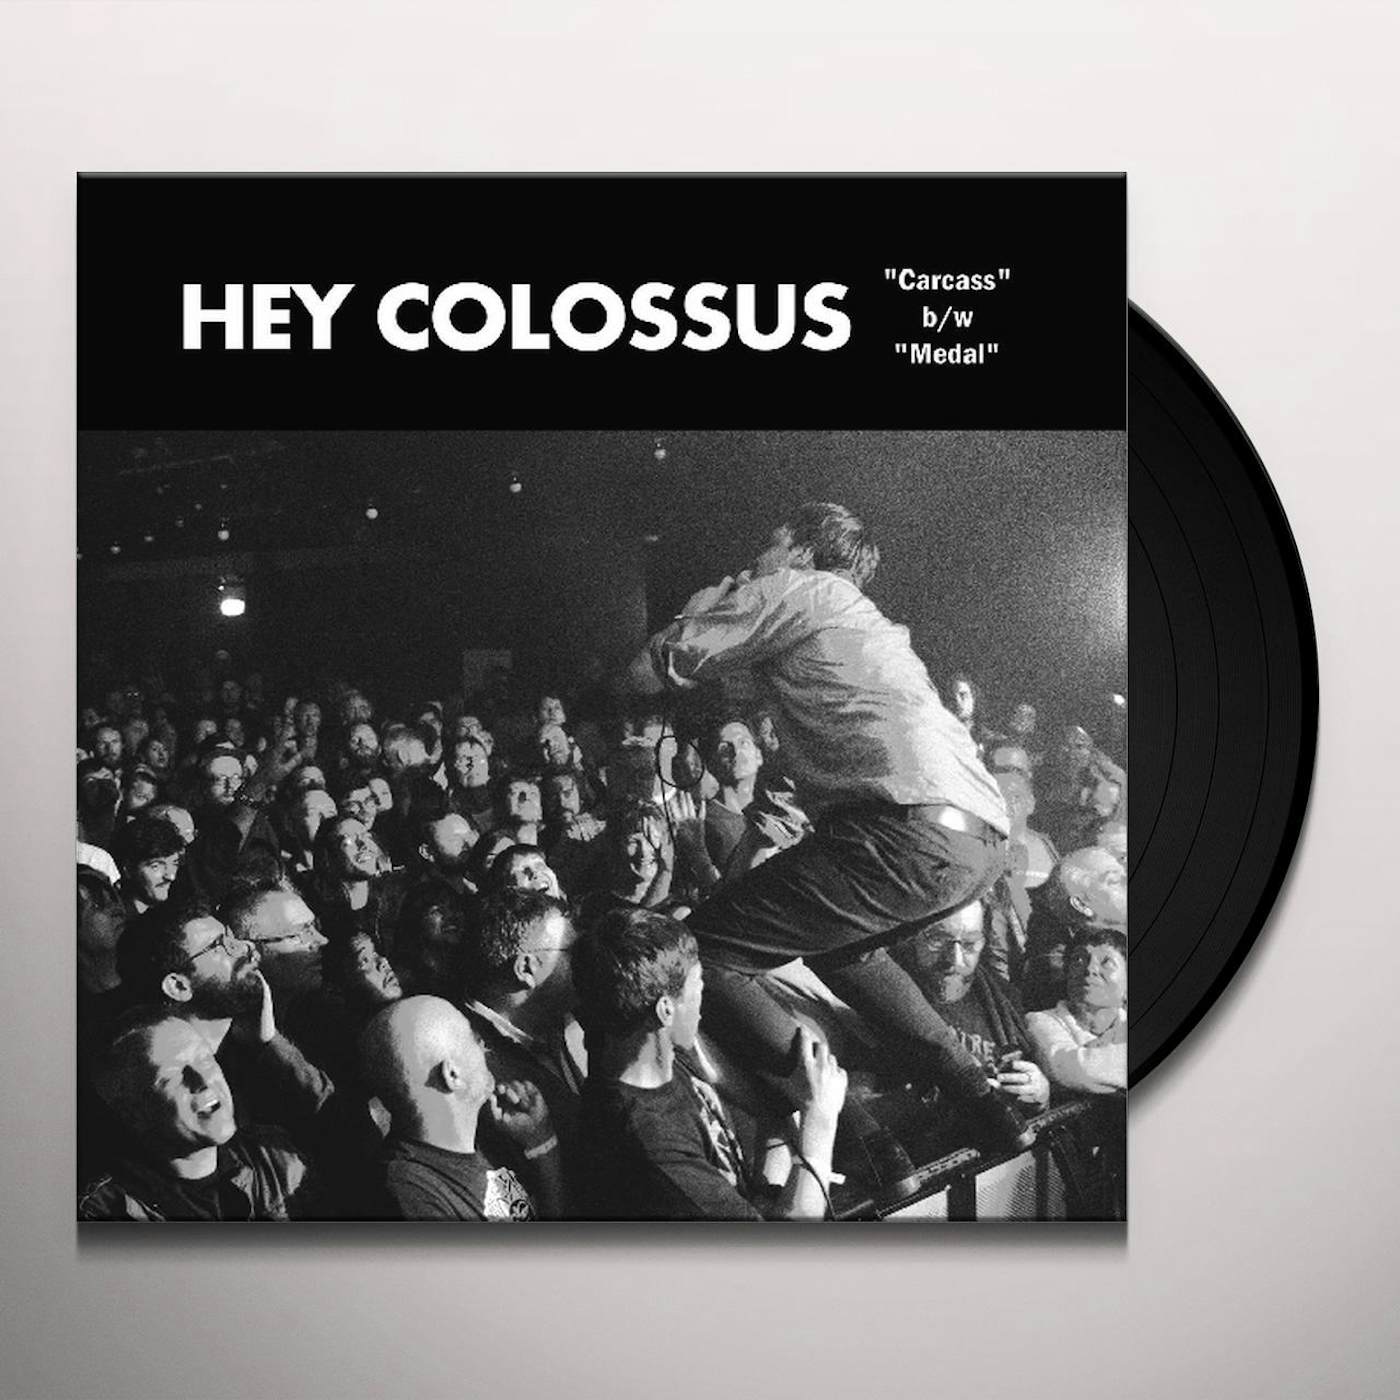 Hey Colossus Carcass / Medal Vinyl Record